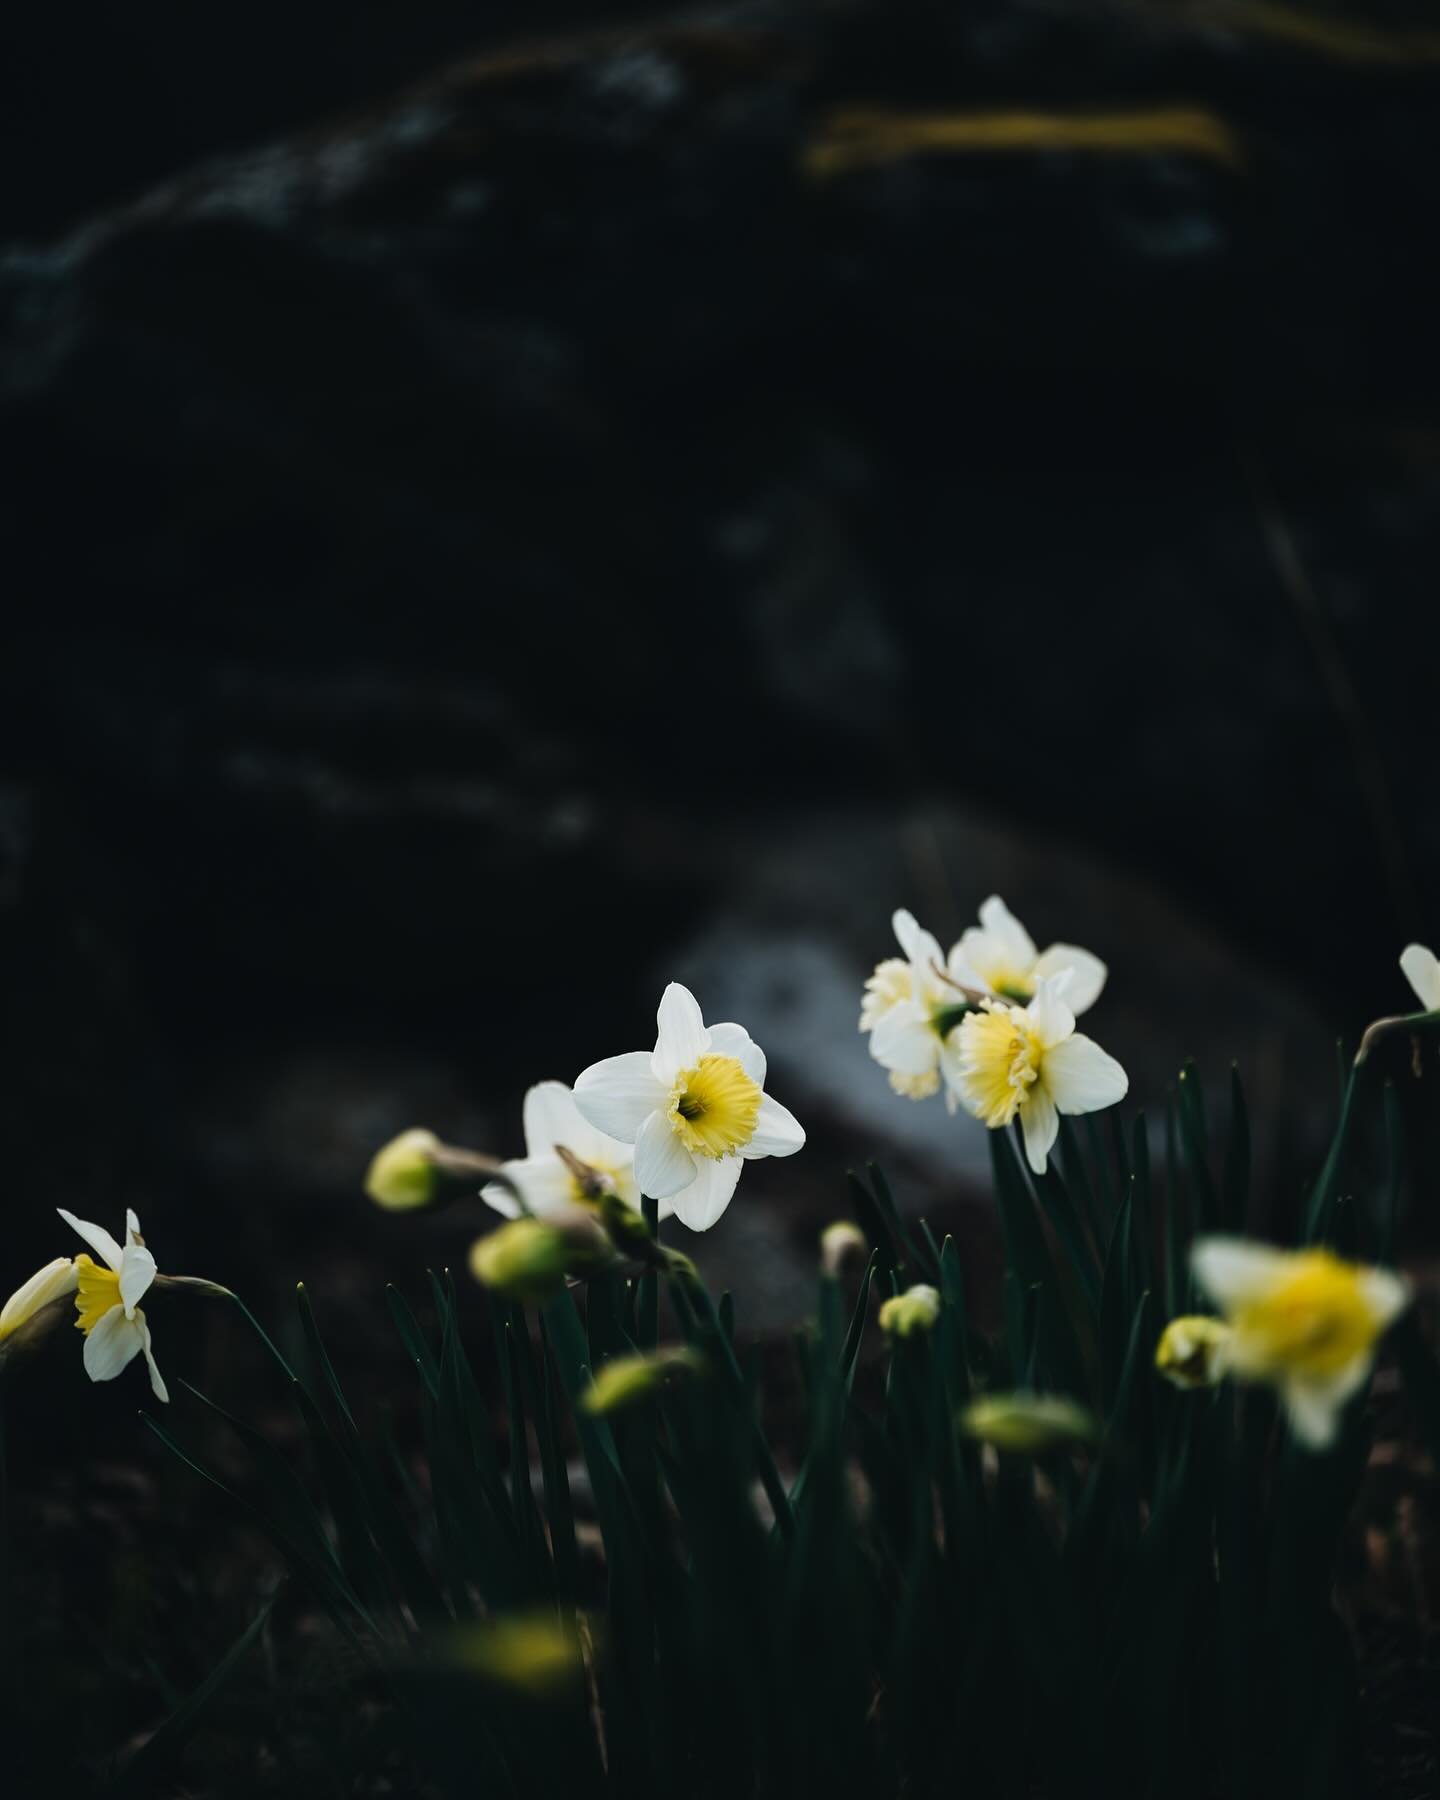 I am having a moment, one influenced by the books I am reading. Photos of the moon, twinkling lights..and daffodils swaying at dusk. What&rsquo;s that all about? Fans of Alice Hoffman books will understand. Occasionally, or perhaps when the full moon